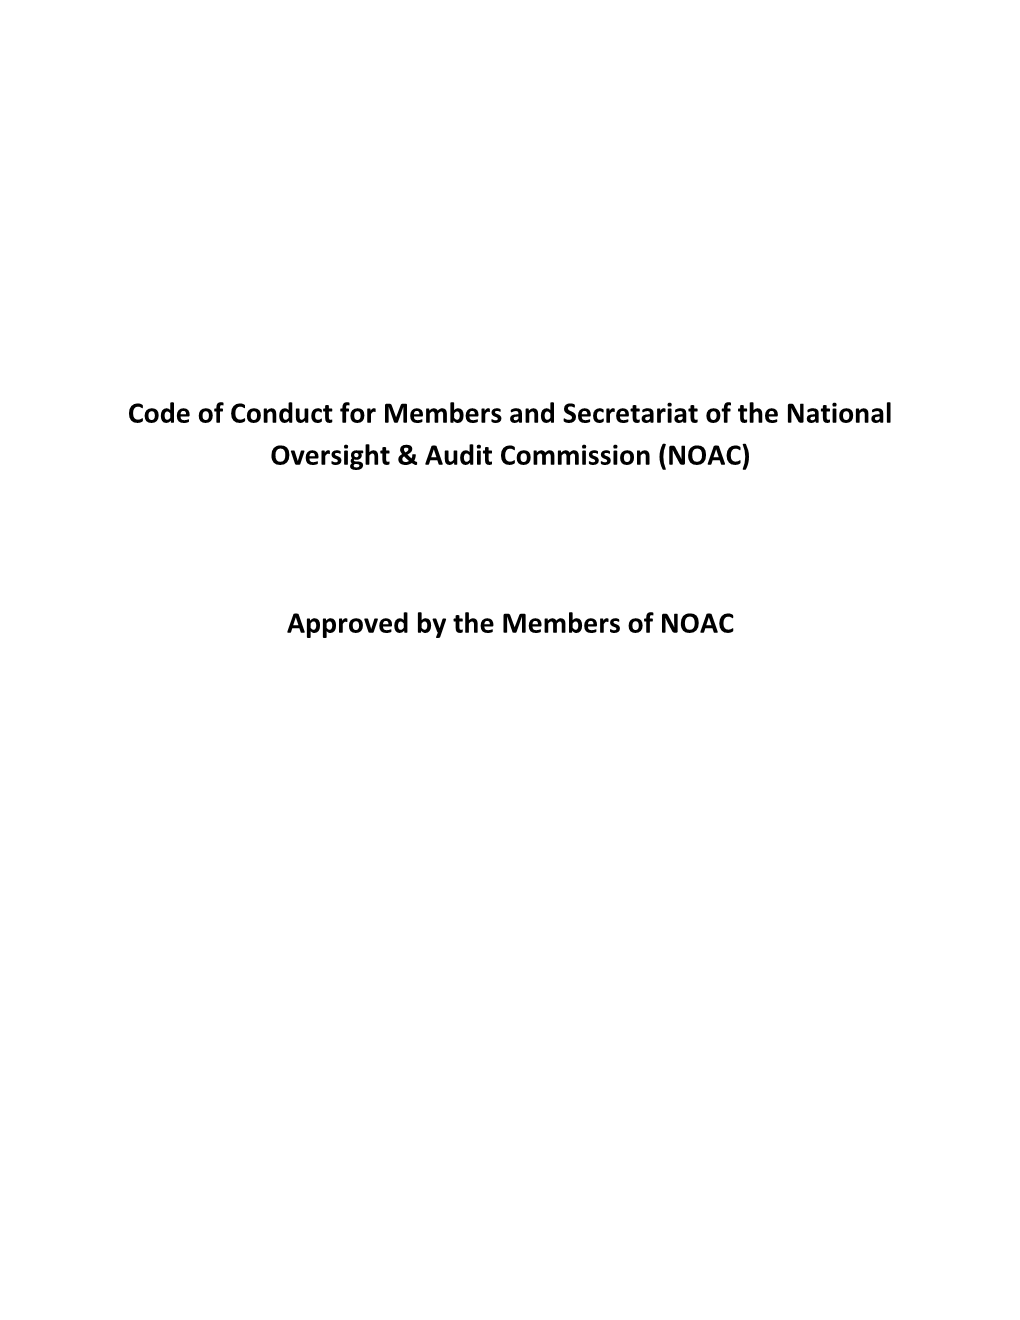 Code of Conduct for Members and Secretariat of the National Oversight & Audit Commission